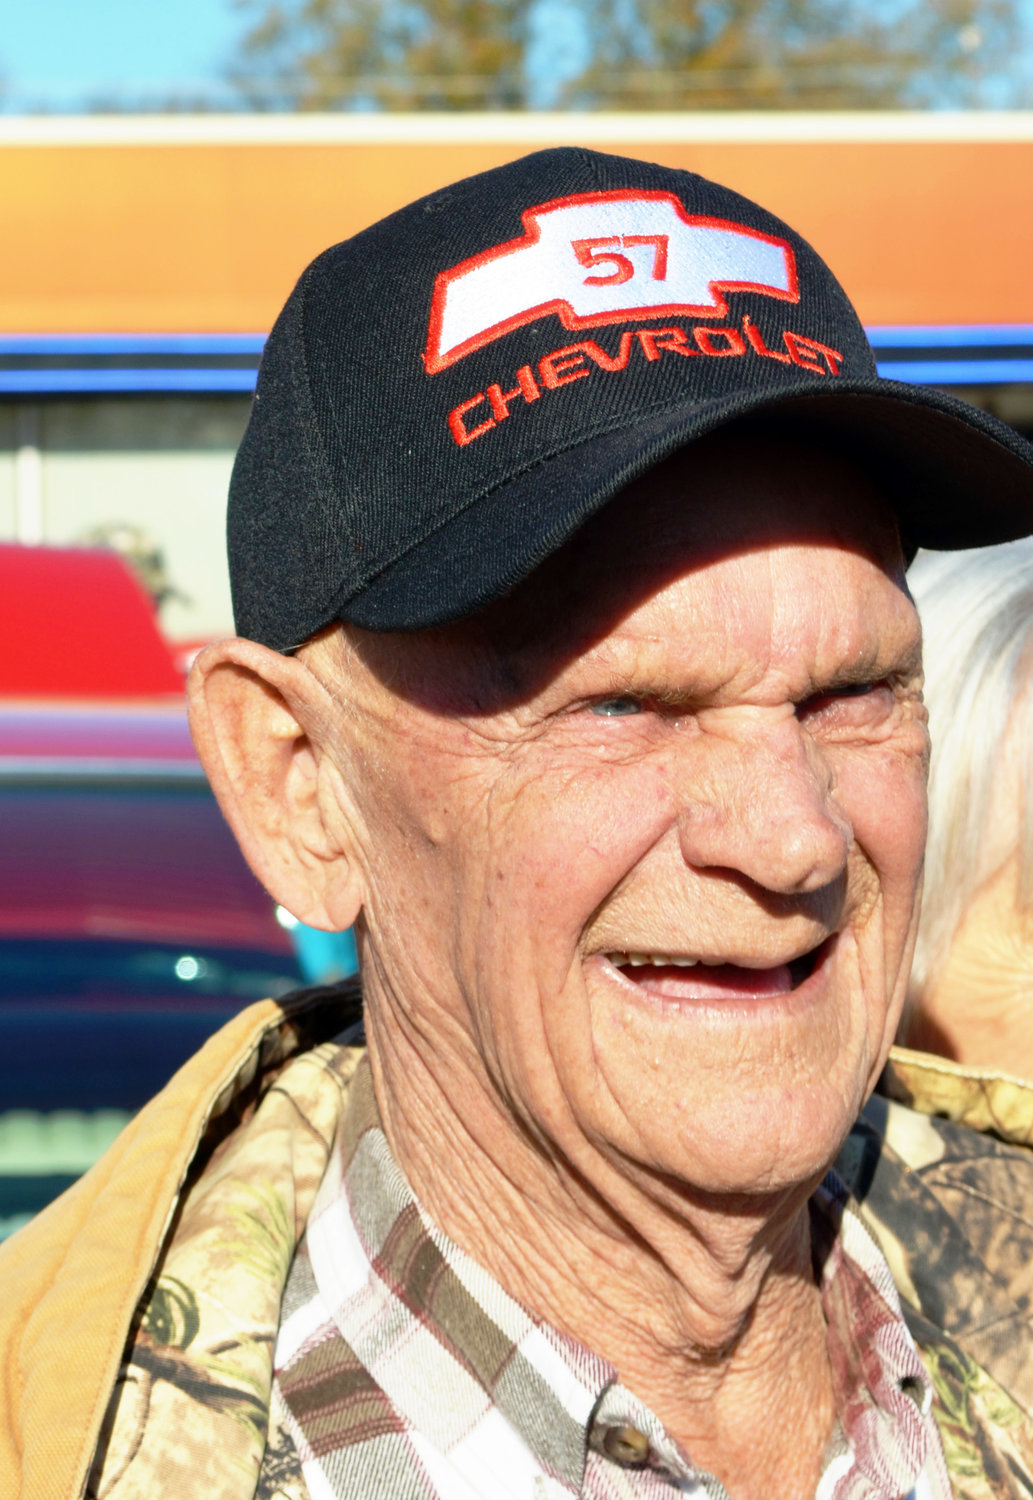 His ball cap signifies Travis Lloyd’s affinity for the ’57 Chevy.